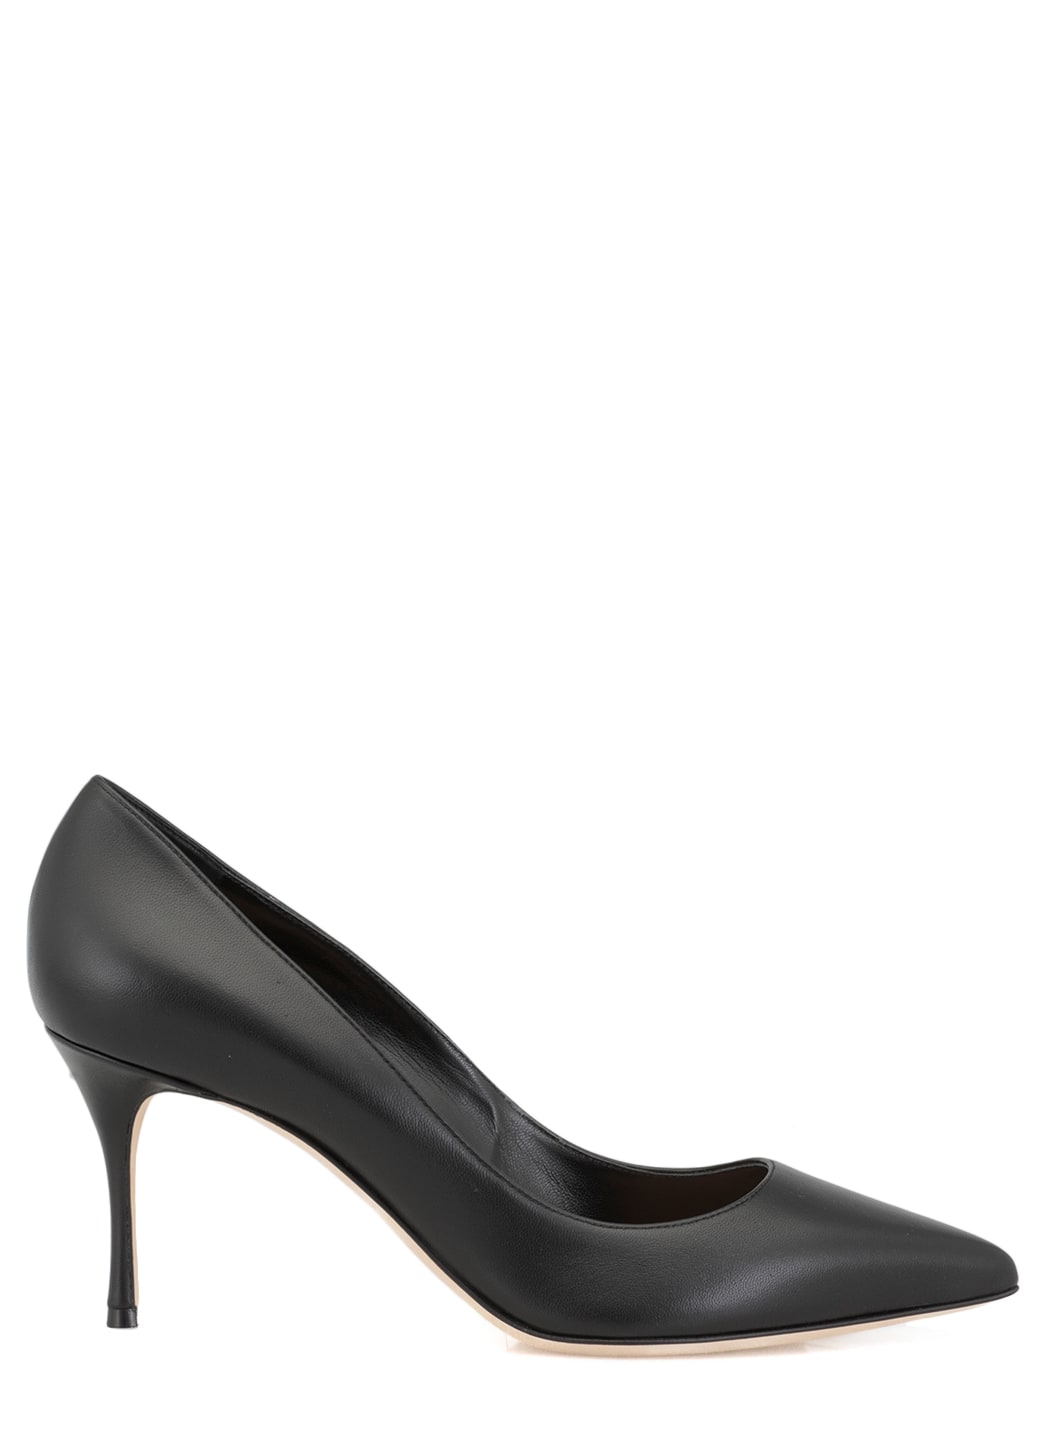 Buy Sergio Rossi Godiva 075 Decollete online, shop Sergio Rossi shoes with free shipping